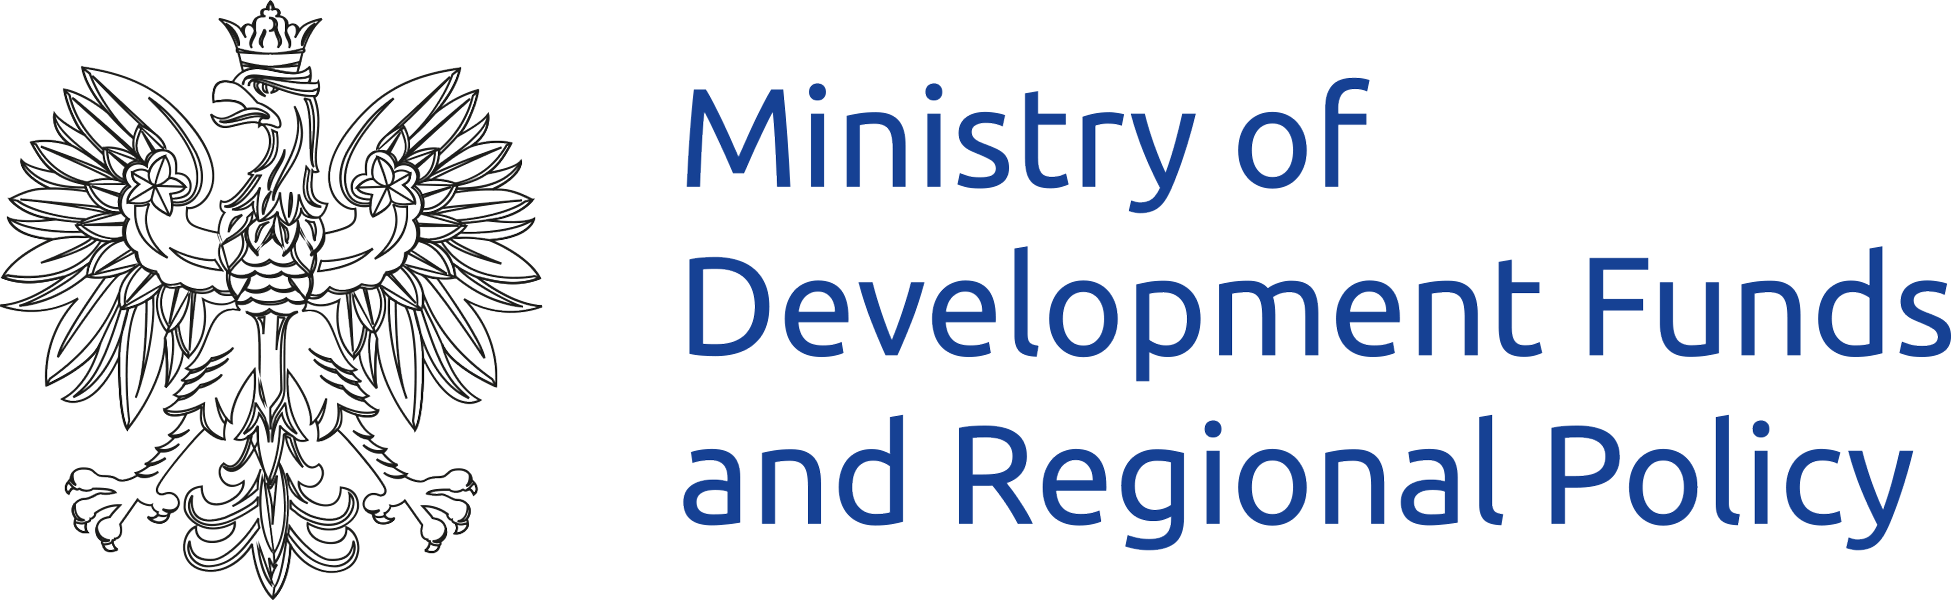 Logo of Ministry of Development Funds and Regional Policy - link to website